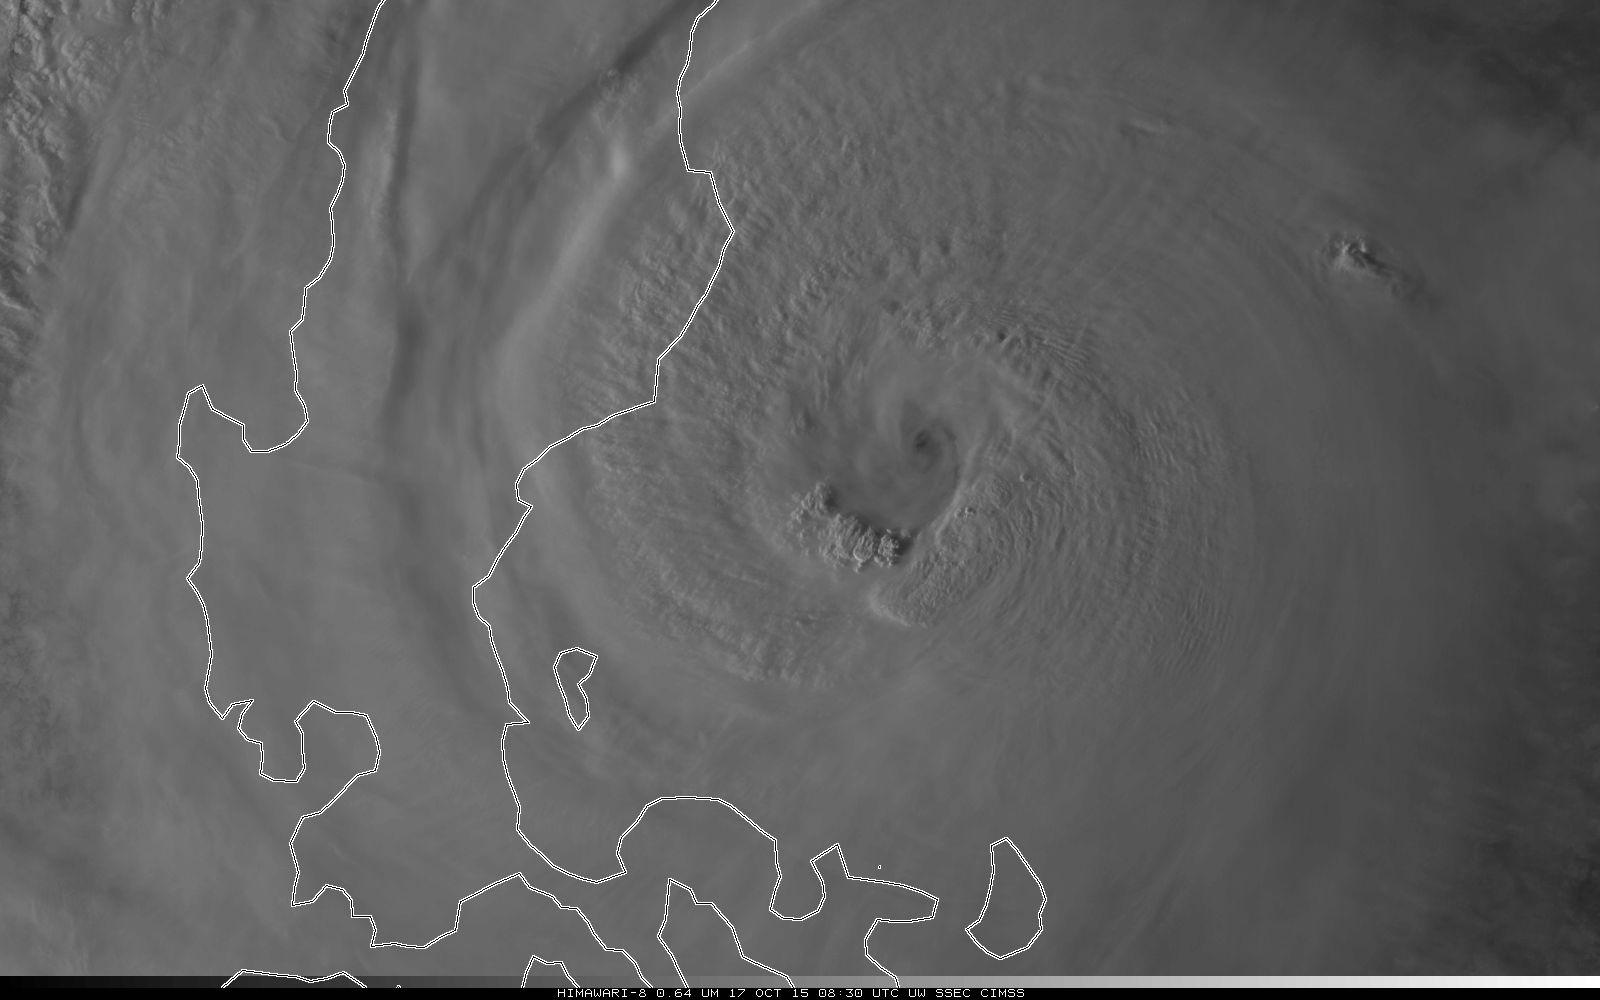 Himawari-8 Visible Imagery (0.63) from 0100 through 0930 UTC on 17 October [click to animate]